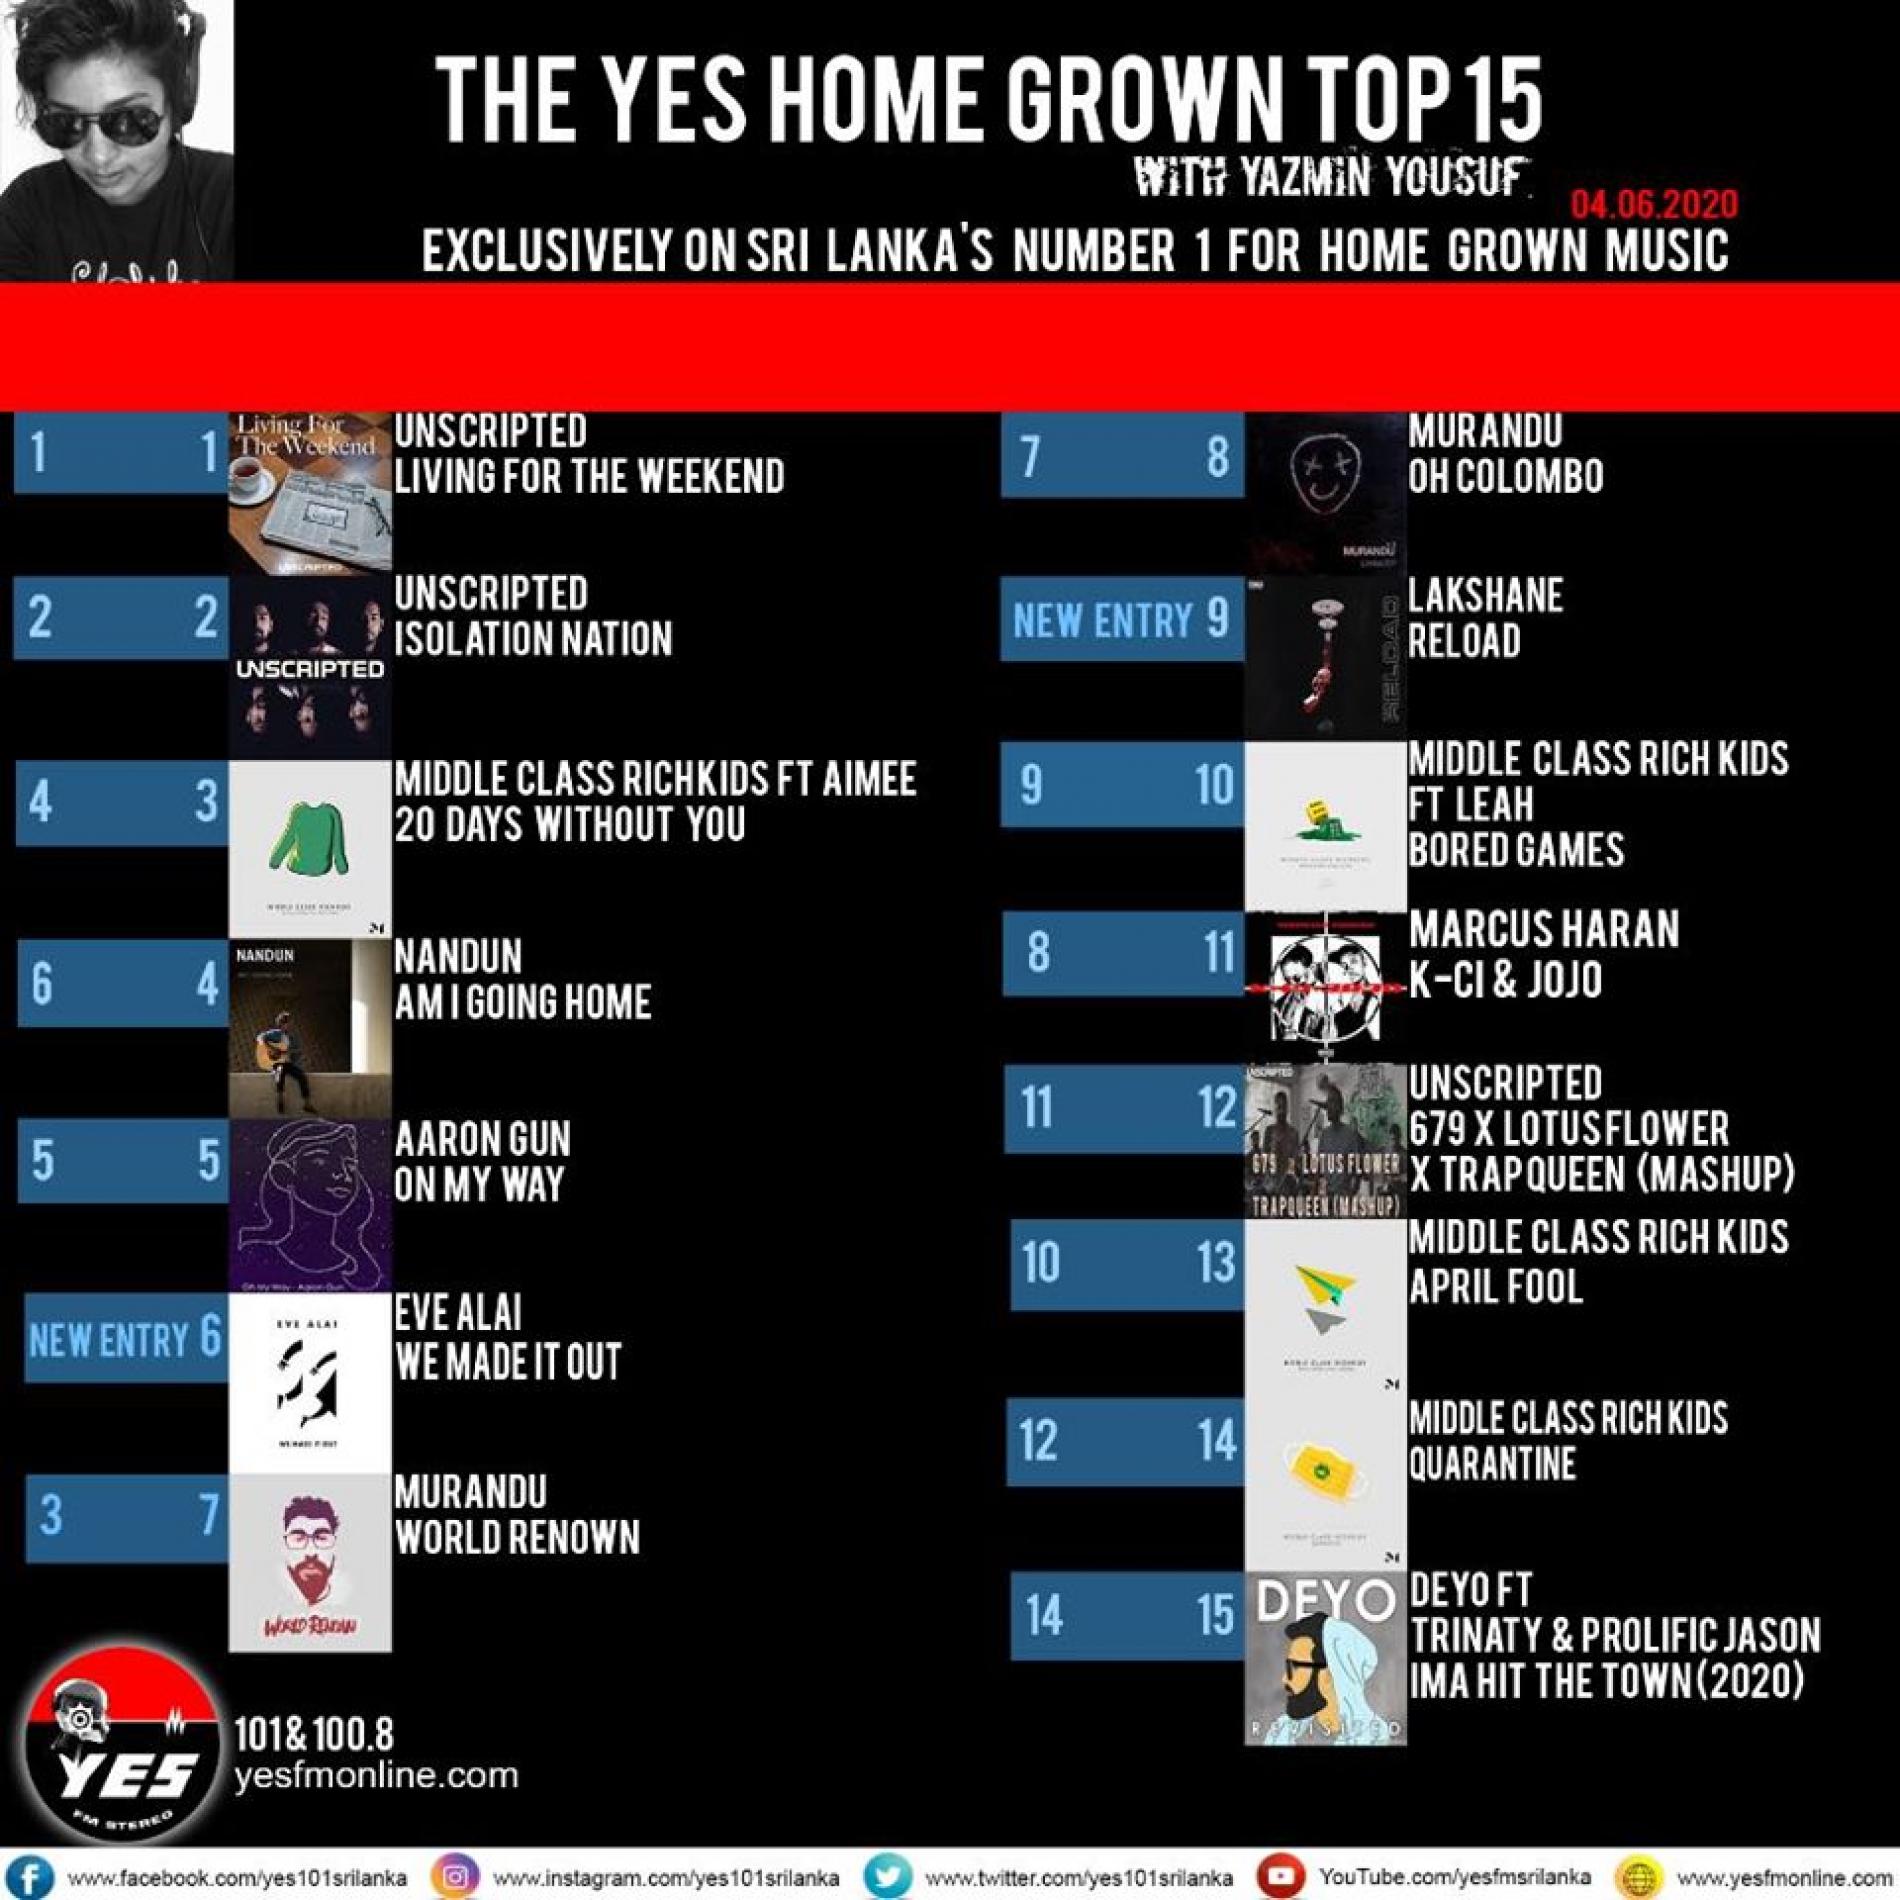 Unscripted Spends Week 3 On The YES Home Grown Top 15’s Top 2